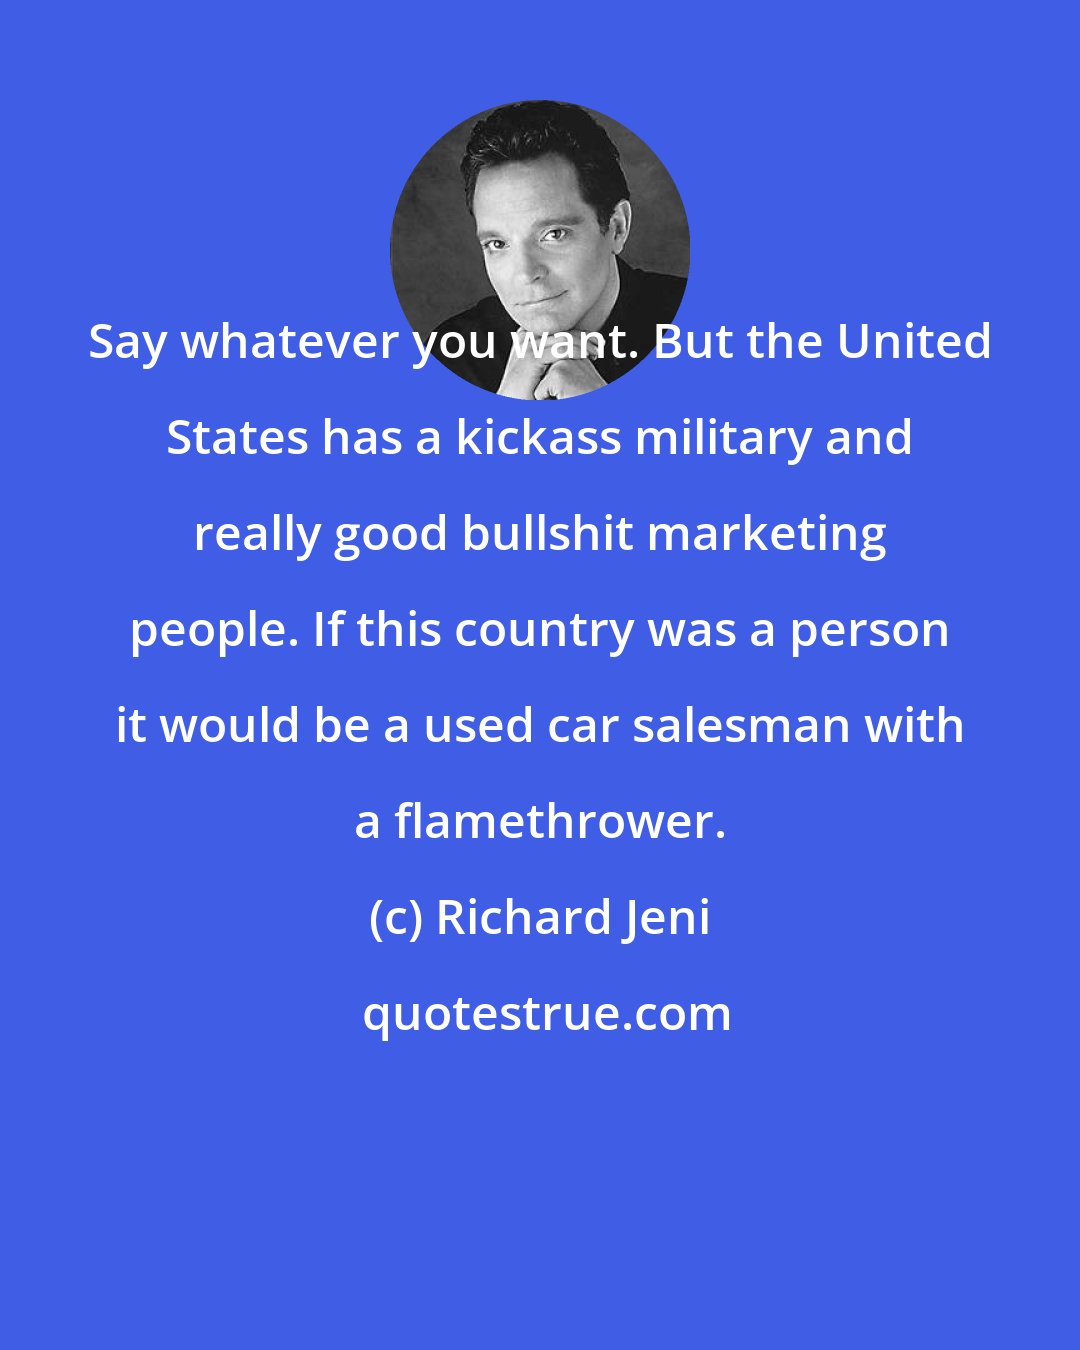 Richard Jeni: Say whatever you want. But the United States has a kickass military and really good bullshit marketing people. If this country was a person it would be a used car salesman with a flamethrower.